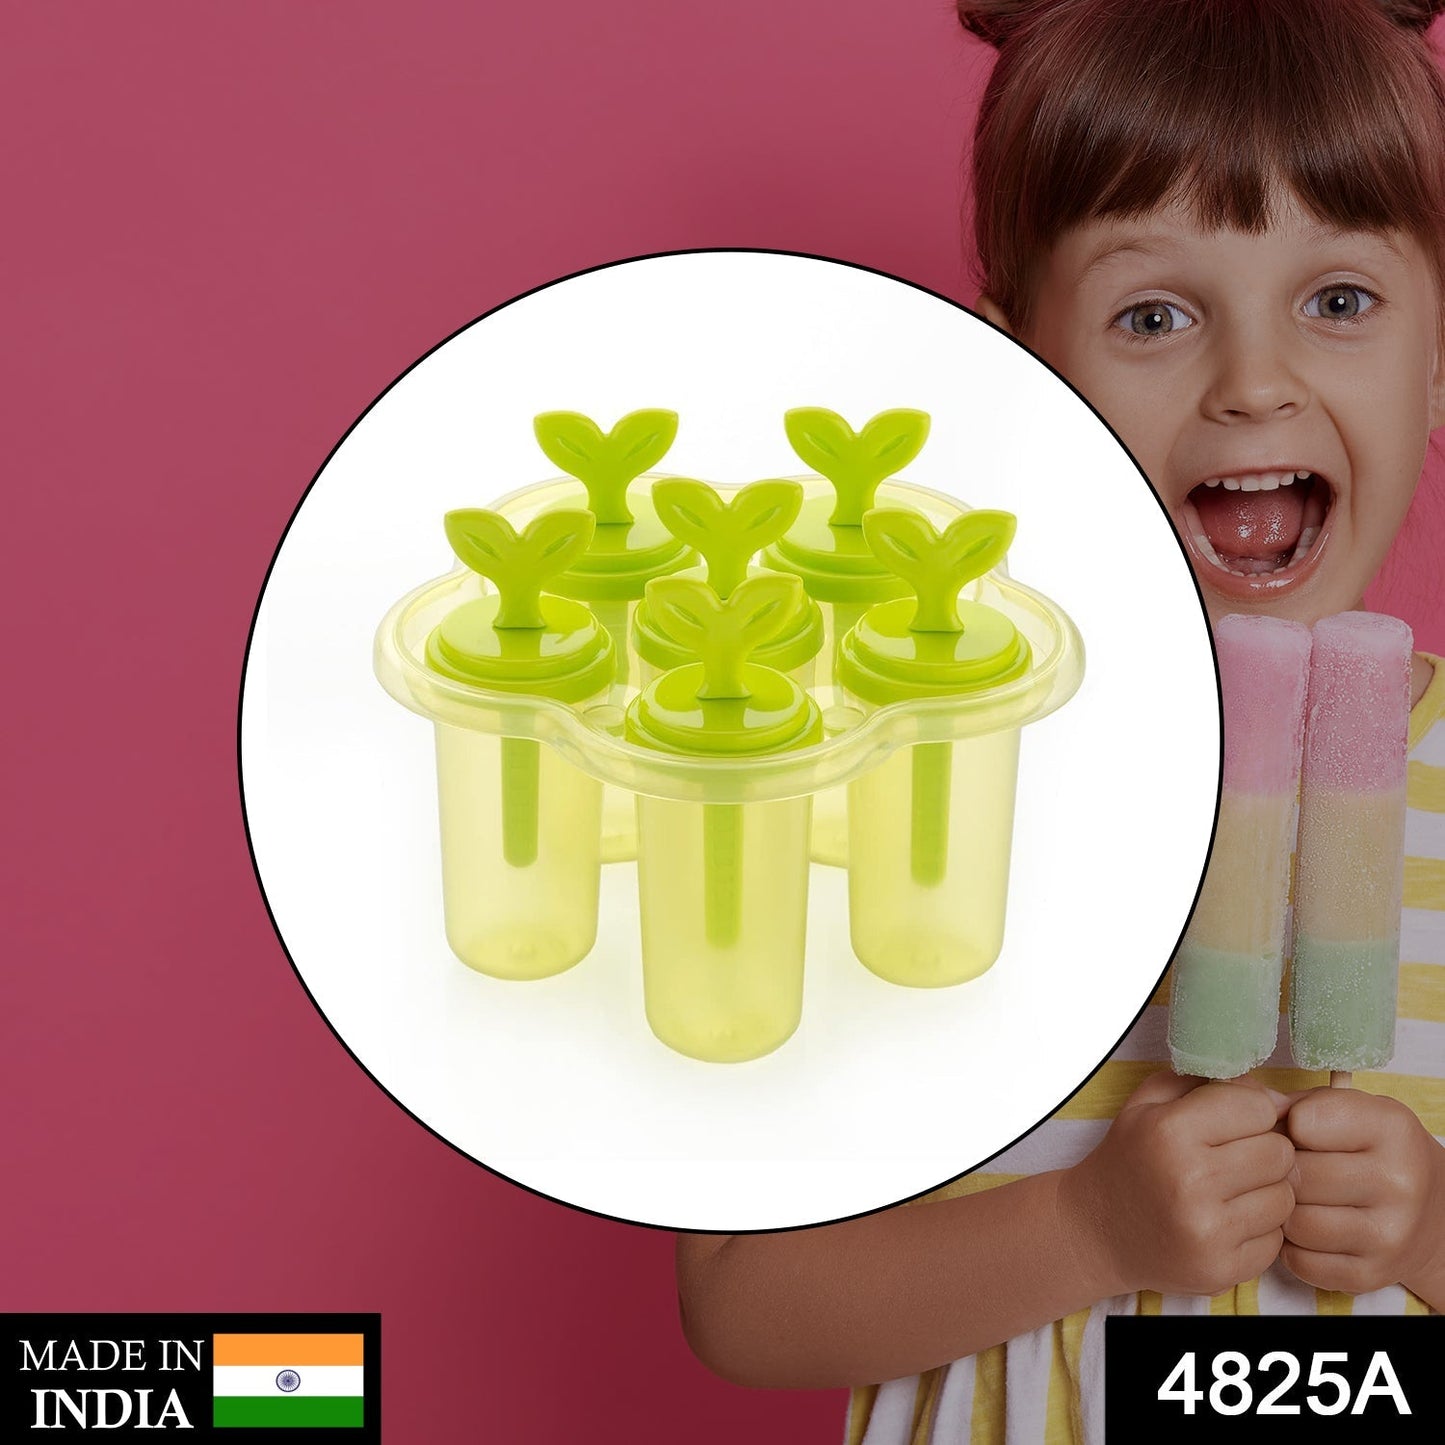 4825A 6 Cavity Ice Candy Maker For Making Ice Candies And All Easily.